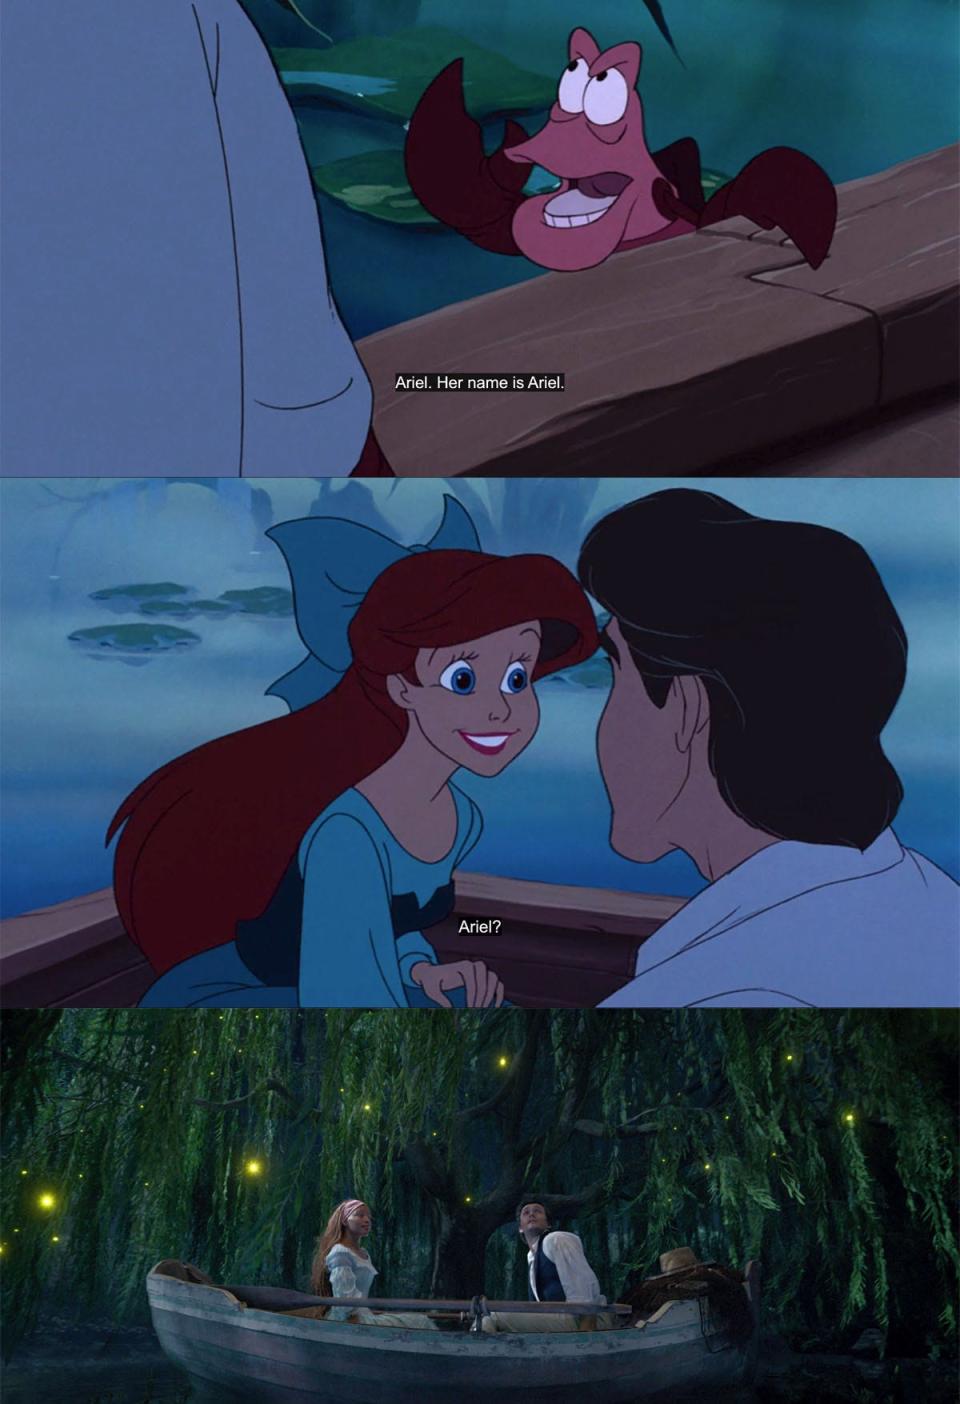 Kiss the Girl scene in both The Little Mermaid animated + live action